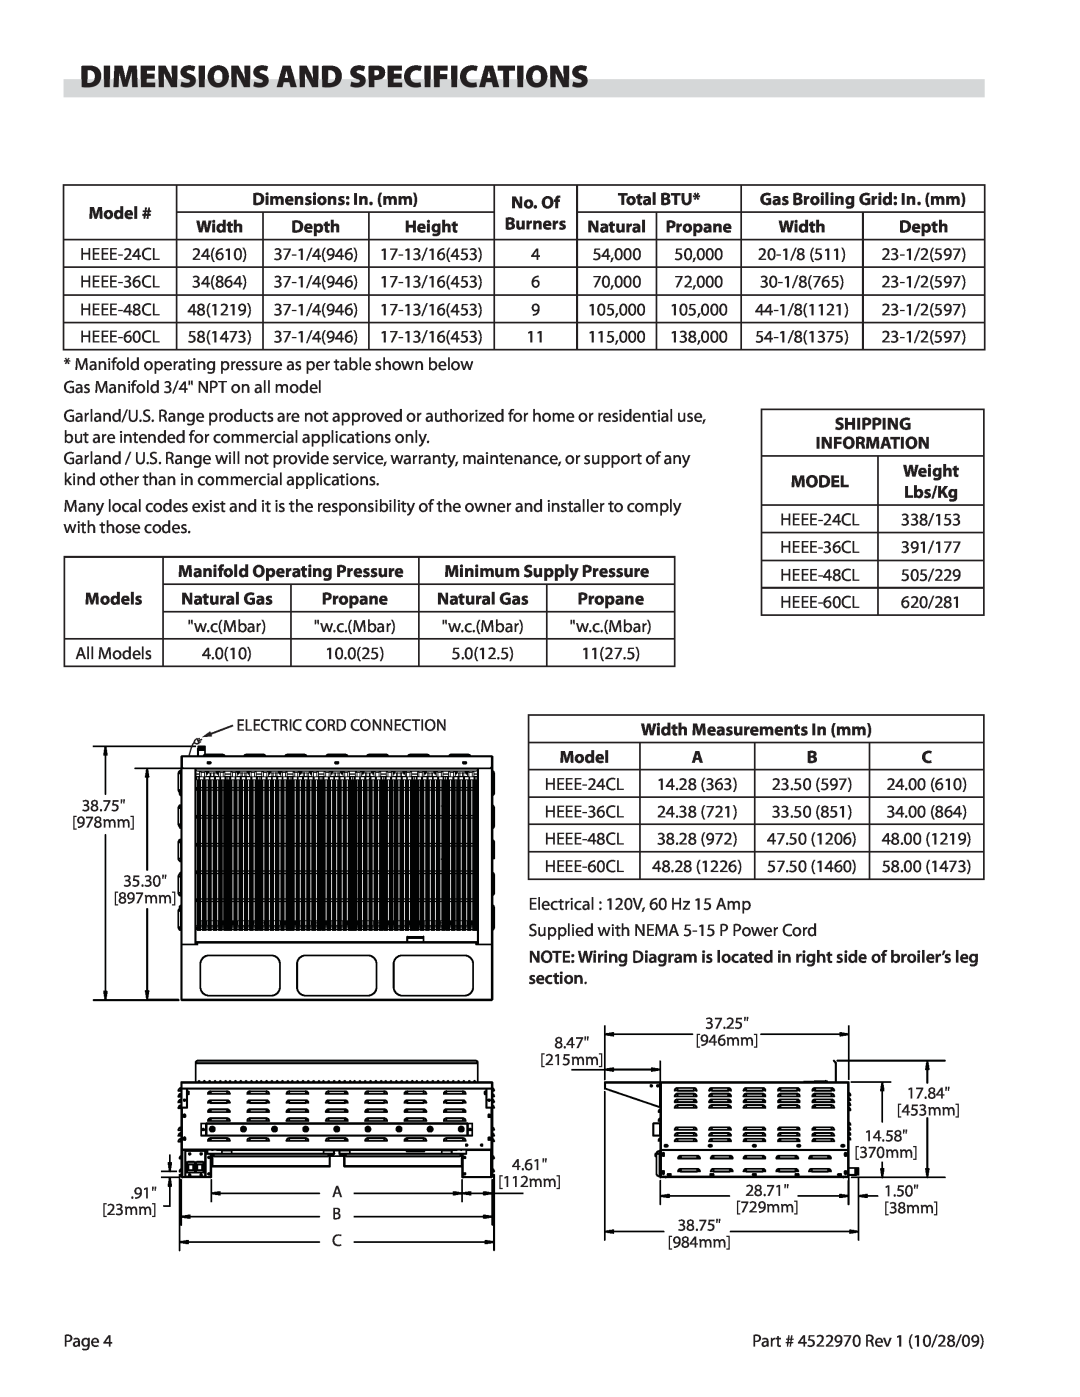 Garland 4522970 REV 1 operation manual Dimensions And Specifications, w..cMbar, 10..025, 1127..5 